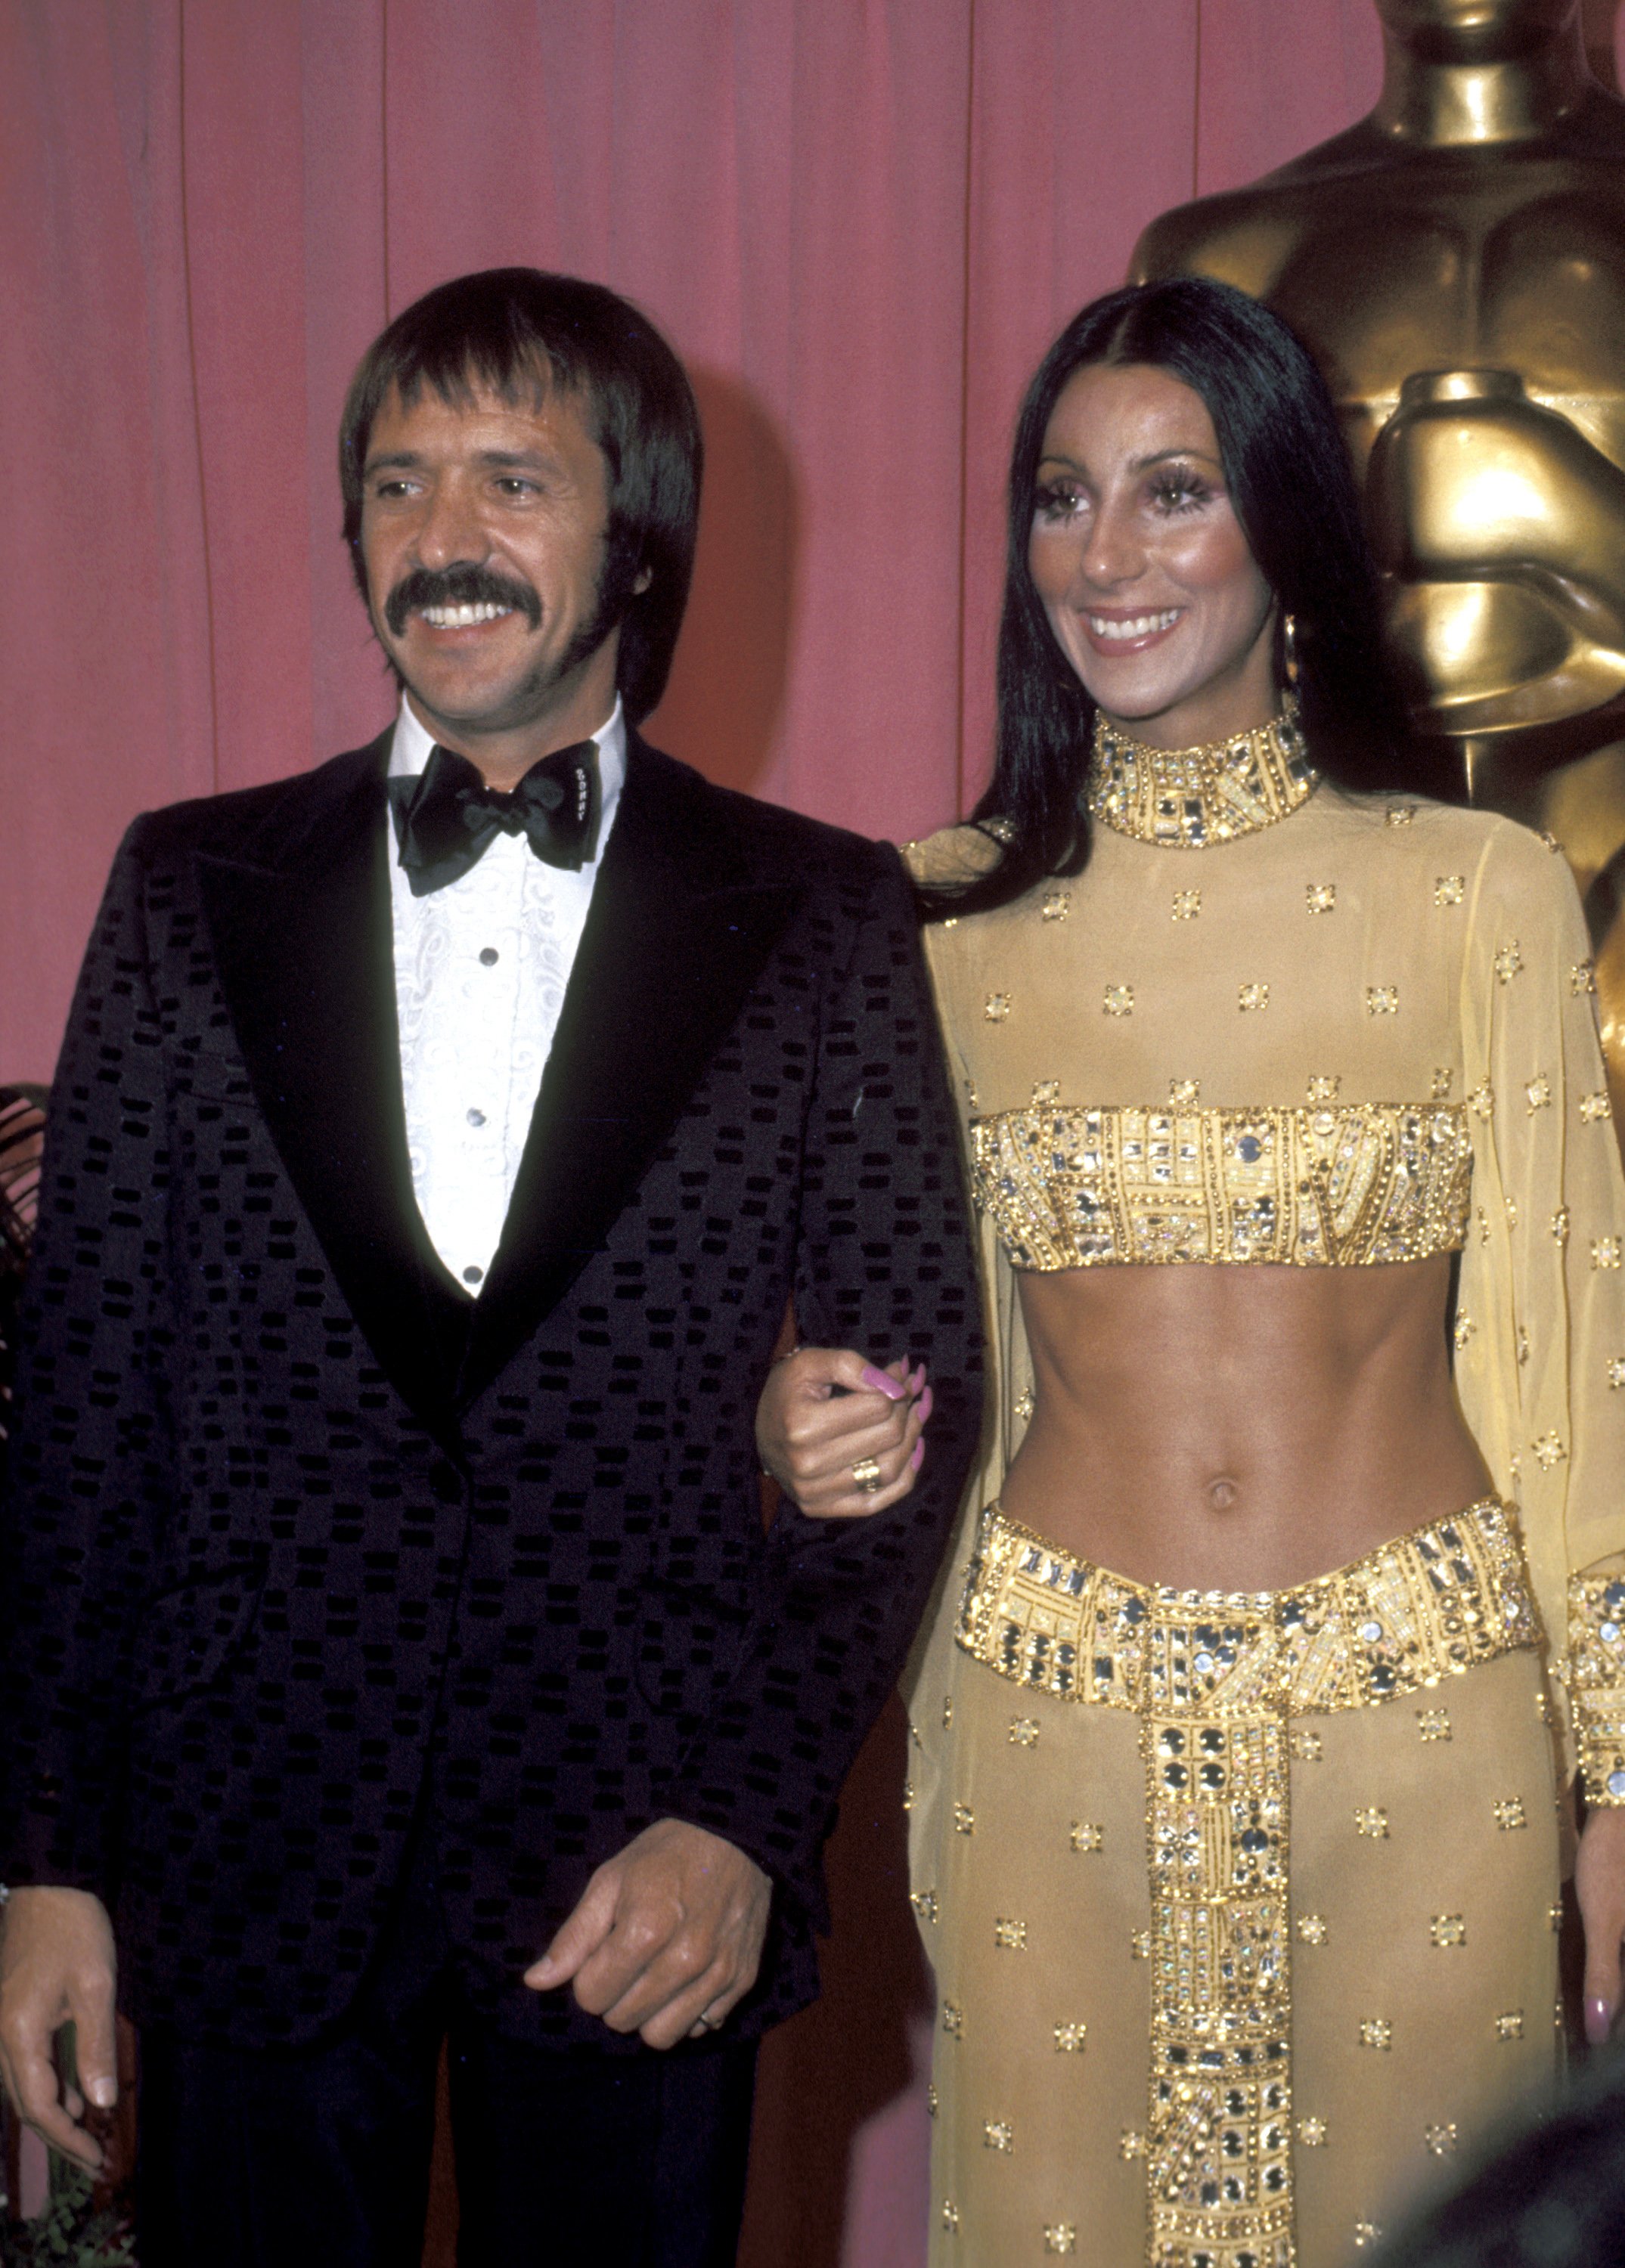 Singers Sonny Bono And Cherduring the 45th Annual Academy Awards in March 1973 | Source: Getty Images